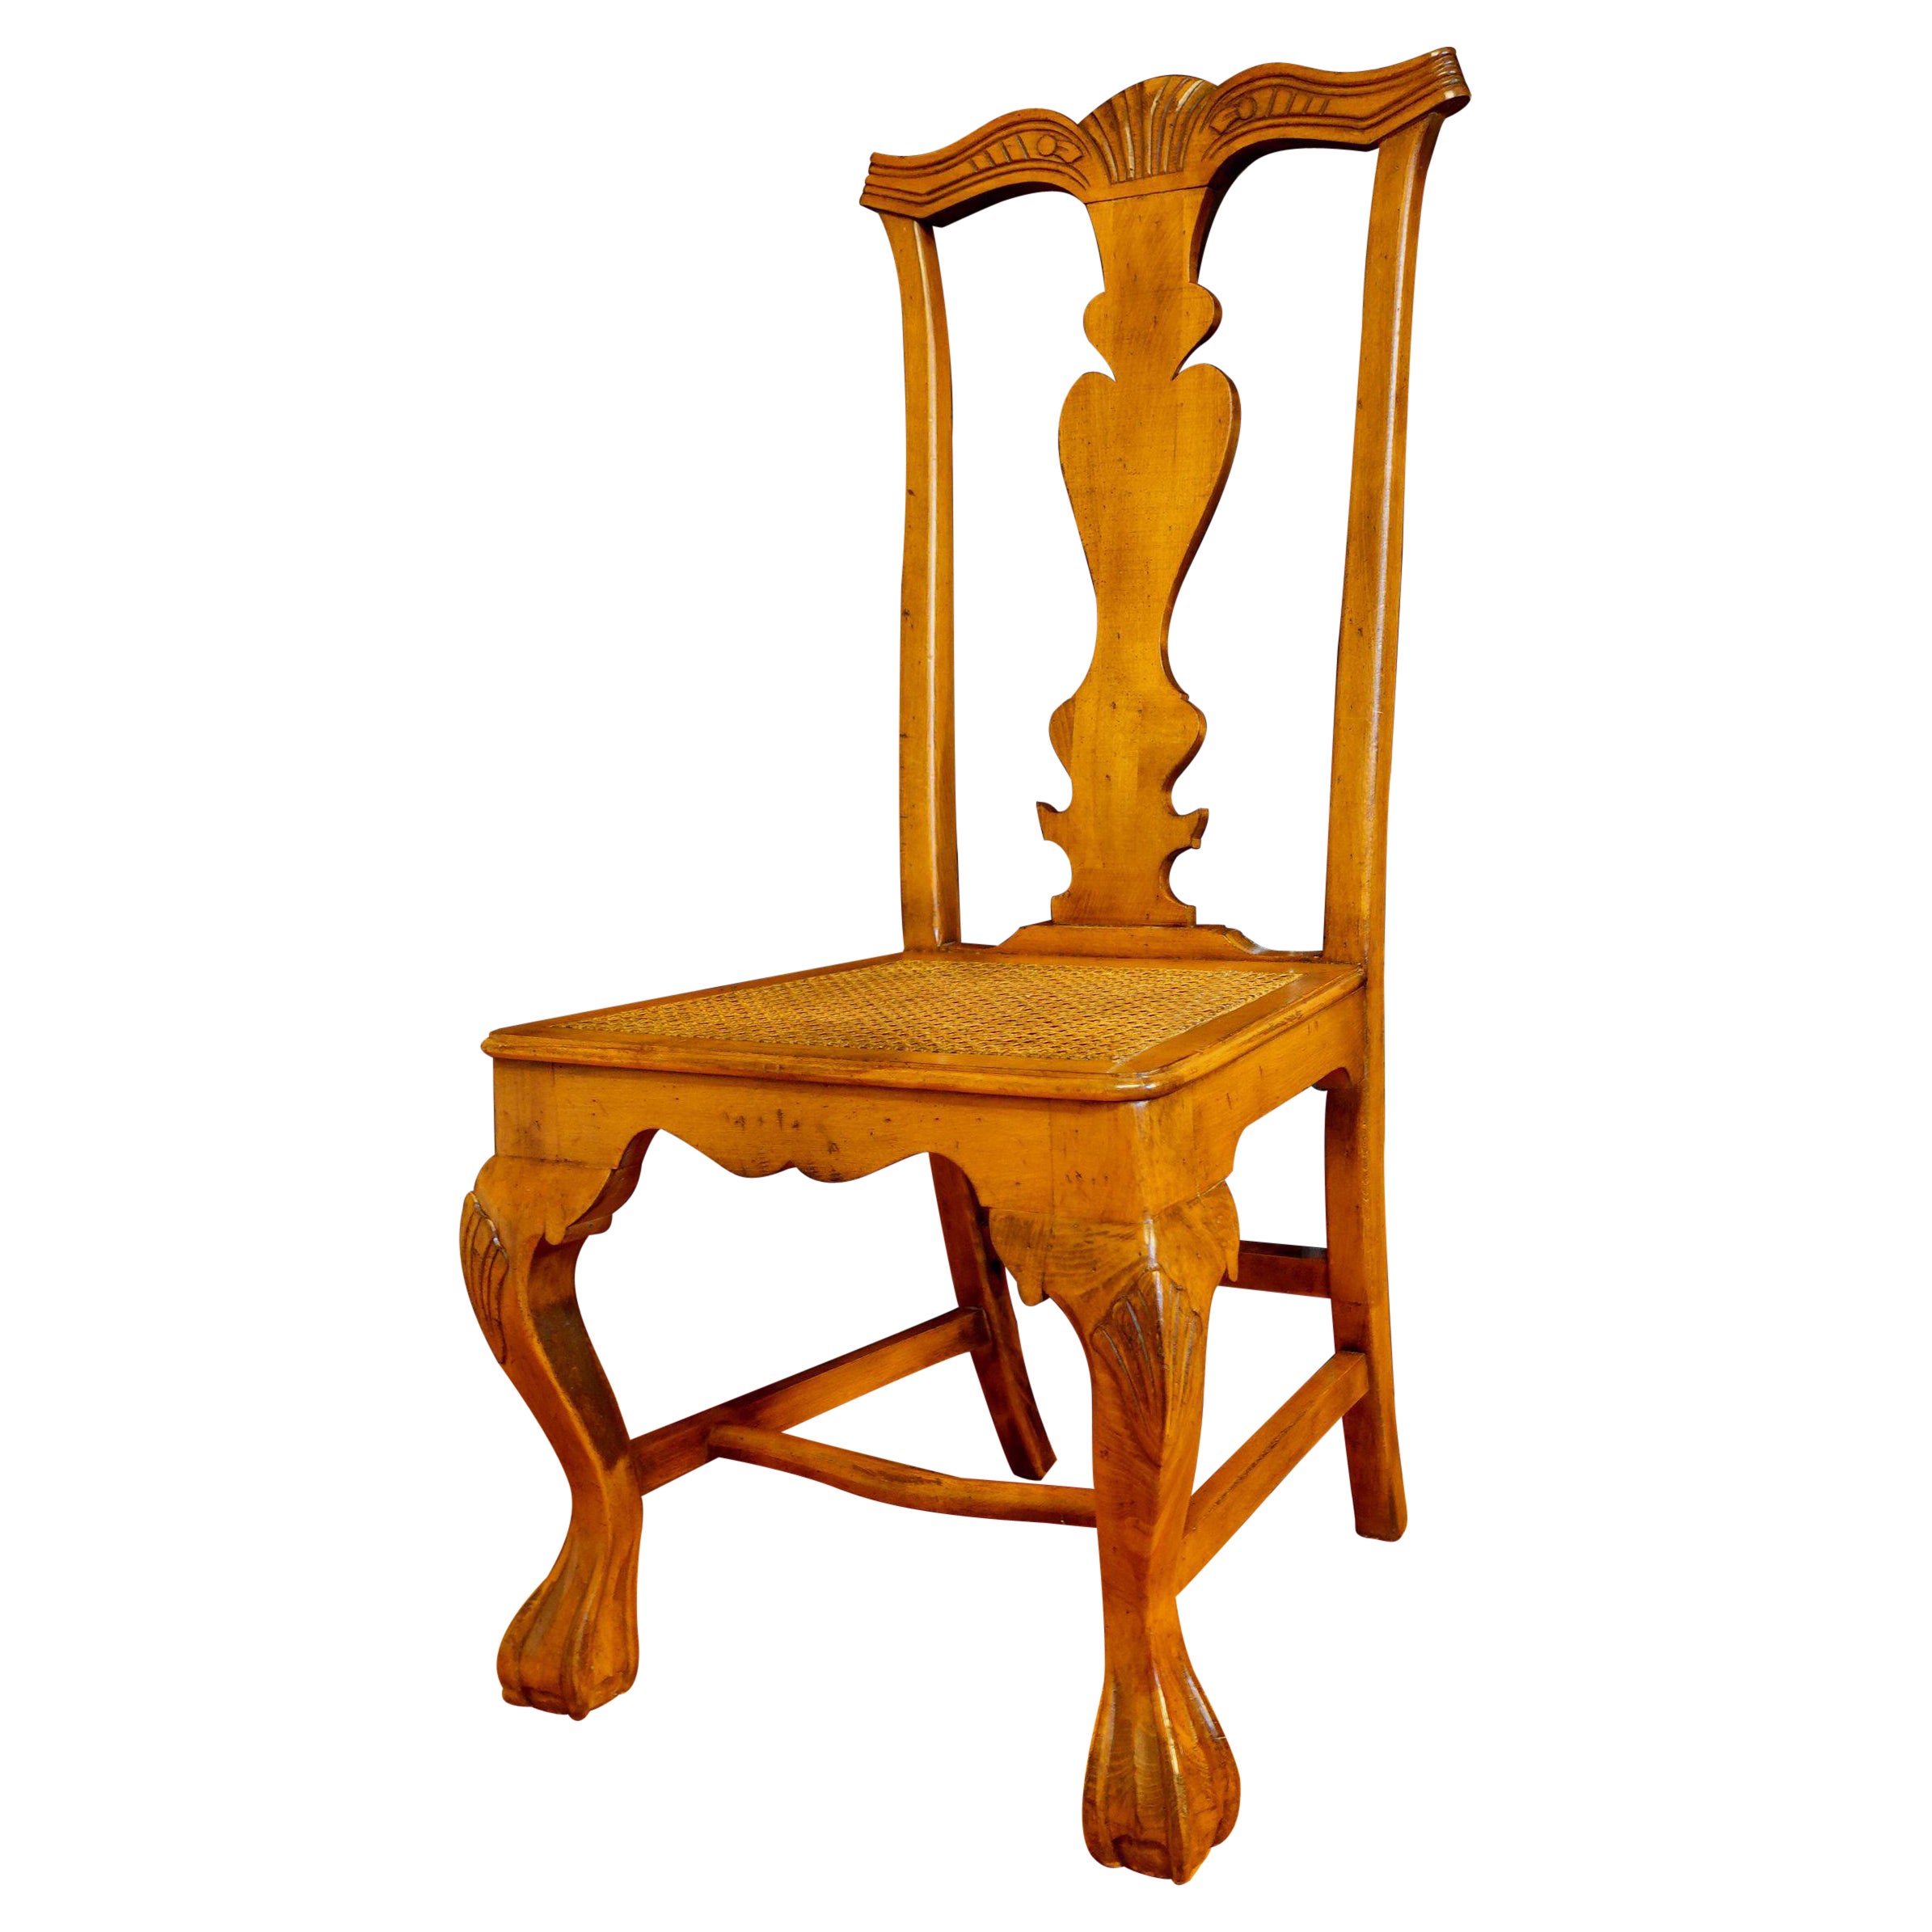 18th Century Queen Anne Period Walnut Single Chair with Caned Seat